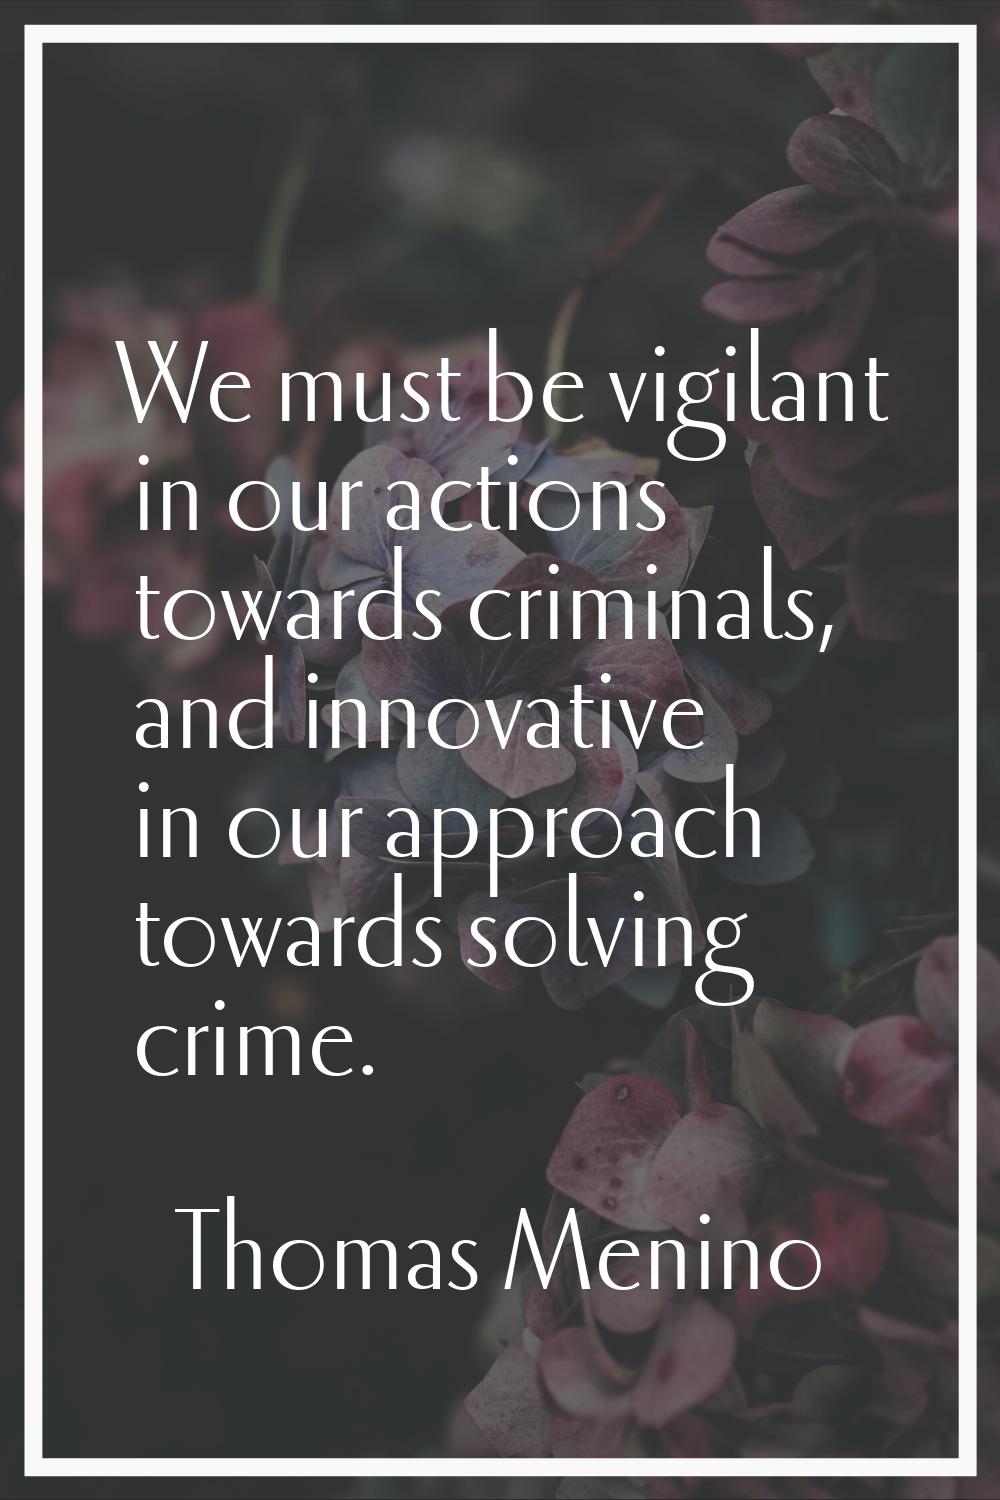 We must be vigilant in our actions towards criminals, and innovative in our approach towards solvin